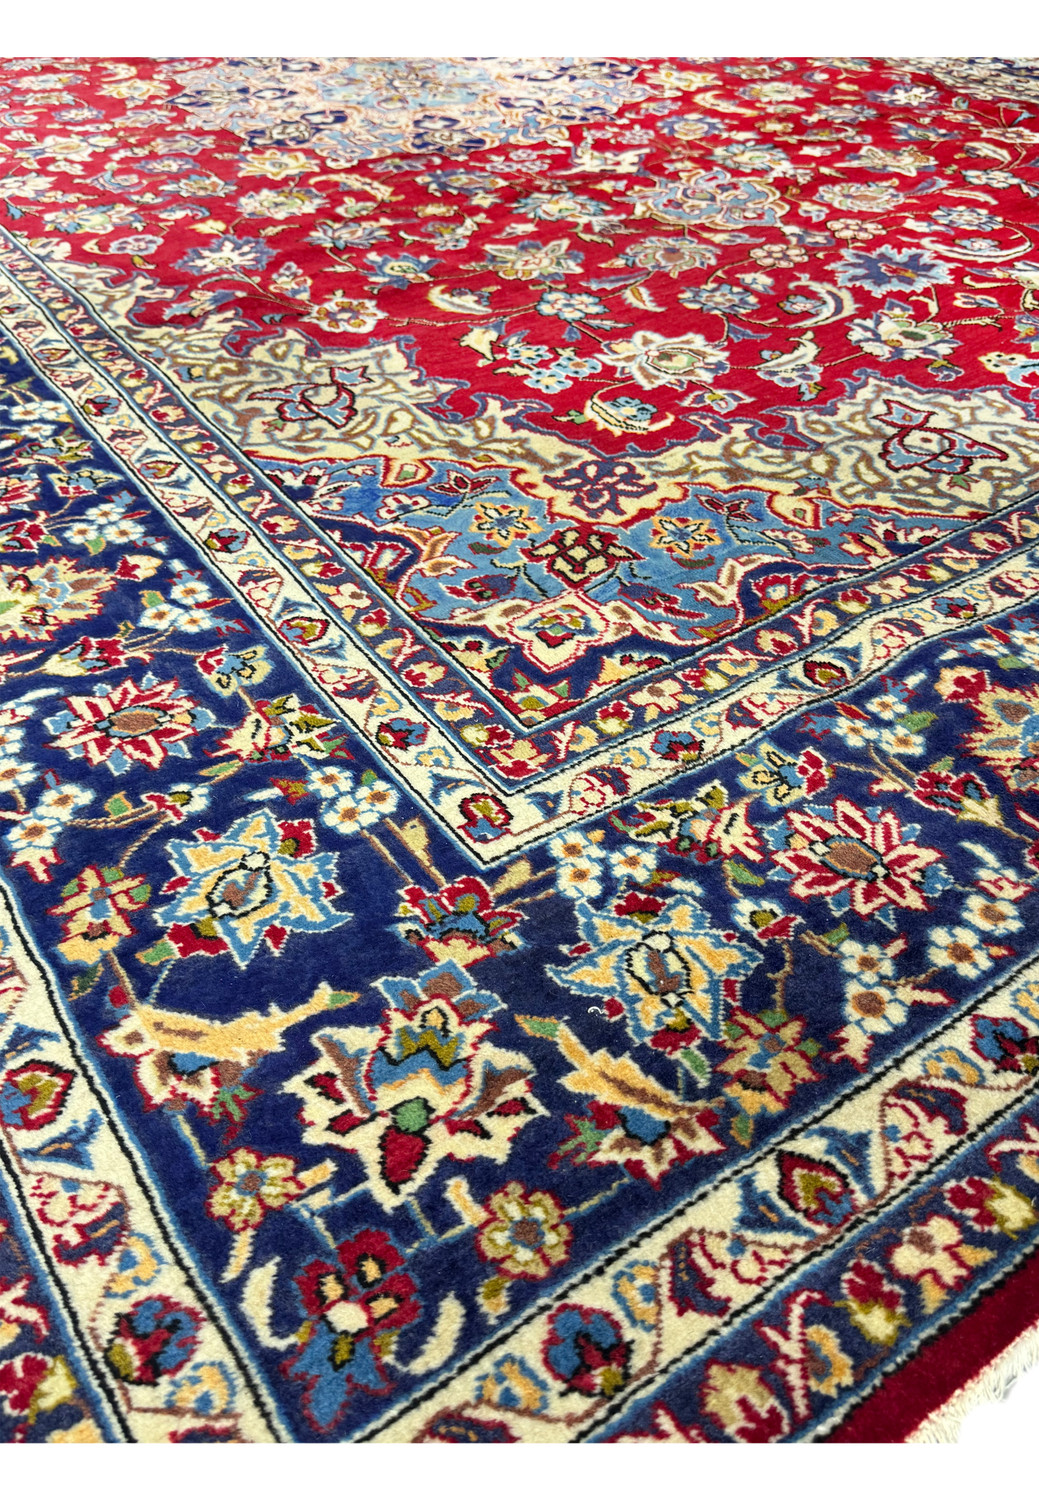 The edge of a rolled 10 x 15 Persian Isfahan rug, highlighting the texture and pattern details with vibrant reds, blues, and creams visible on the layers